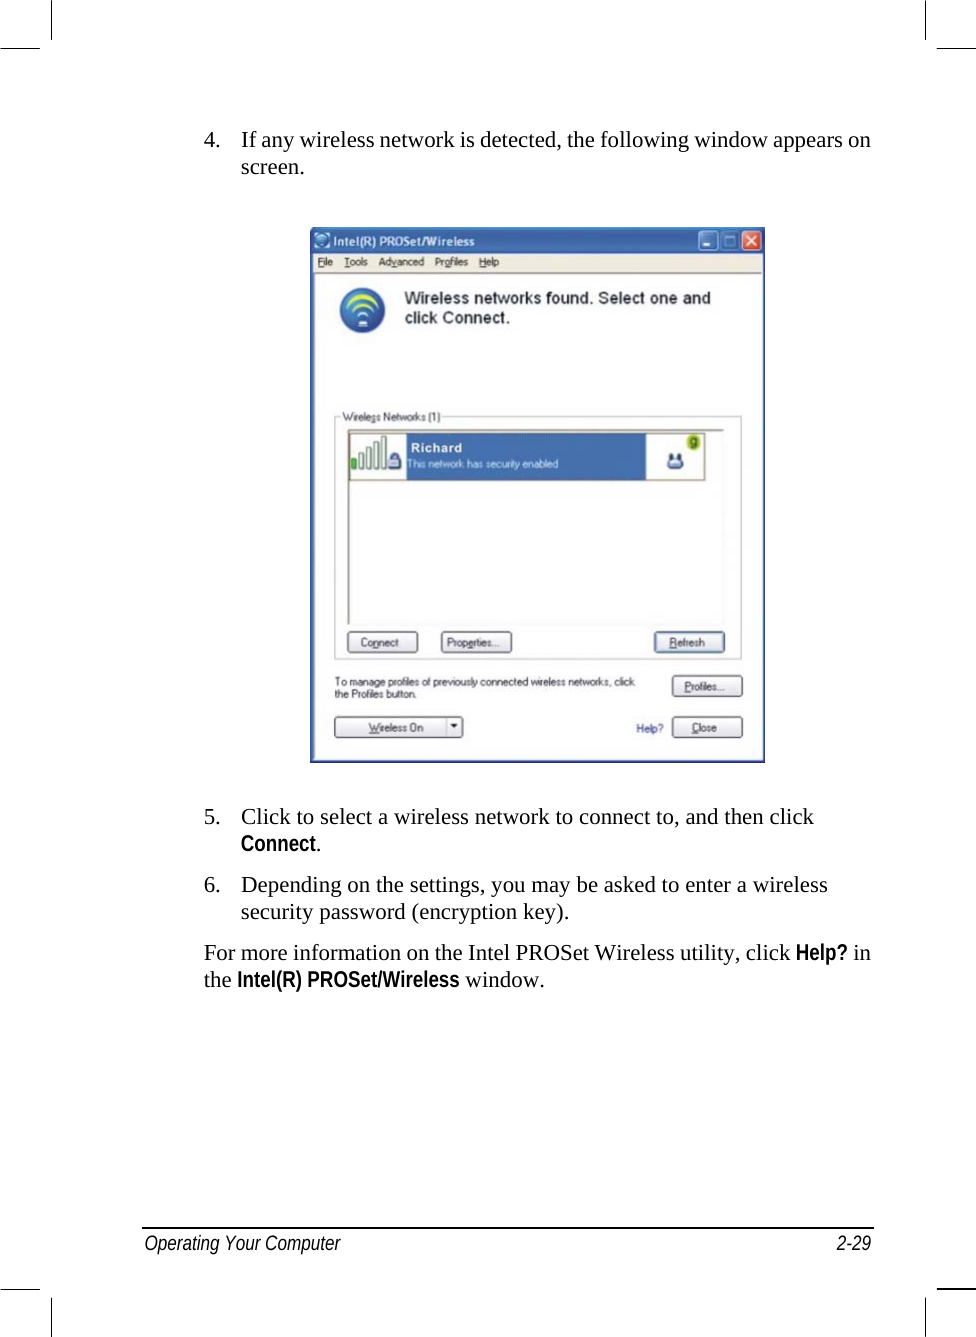  4.  If any wireless network is detected, the following window appears on screen.  5.  Click to select a wireless network to connect to, and then click Connect. 6.  Depending on the settings, you may be asked to enter a wireless security password (encryption key). For more information on the Intel PROSet Wireless utility, click Help? in the Intel(R) PROSet/Wireless window. Operating Your Computer  2-29 